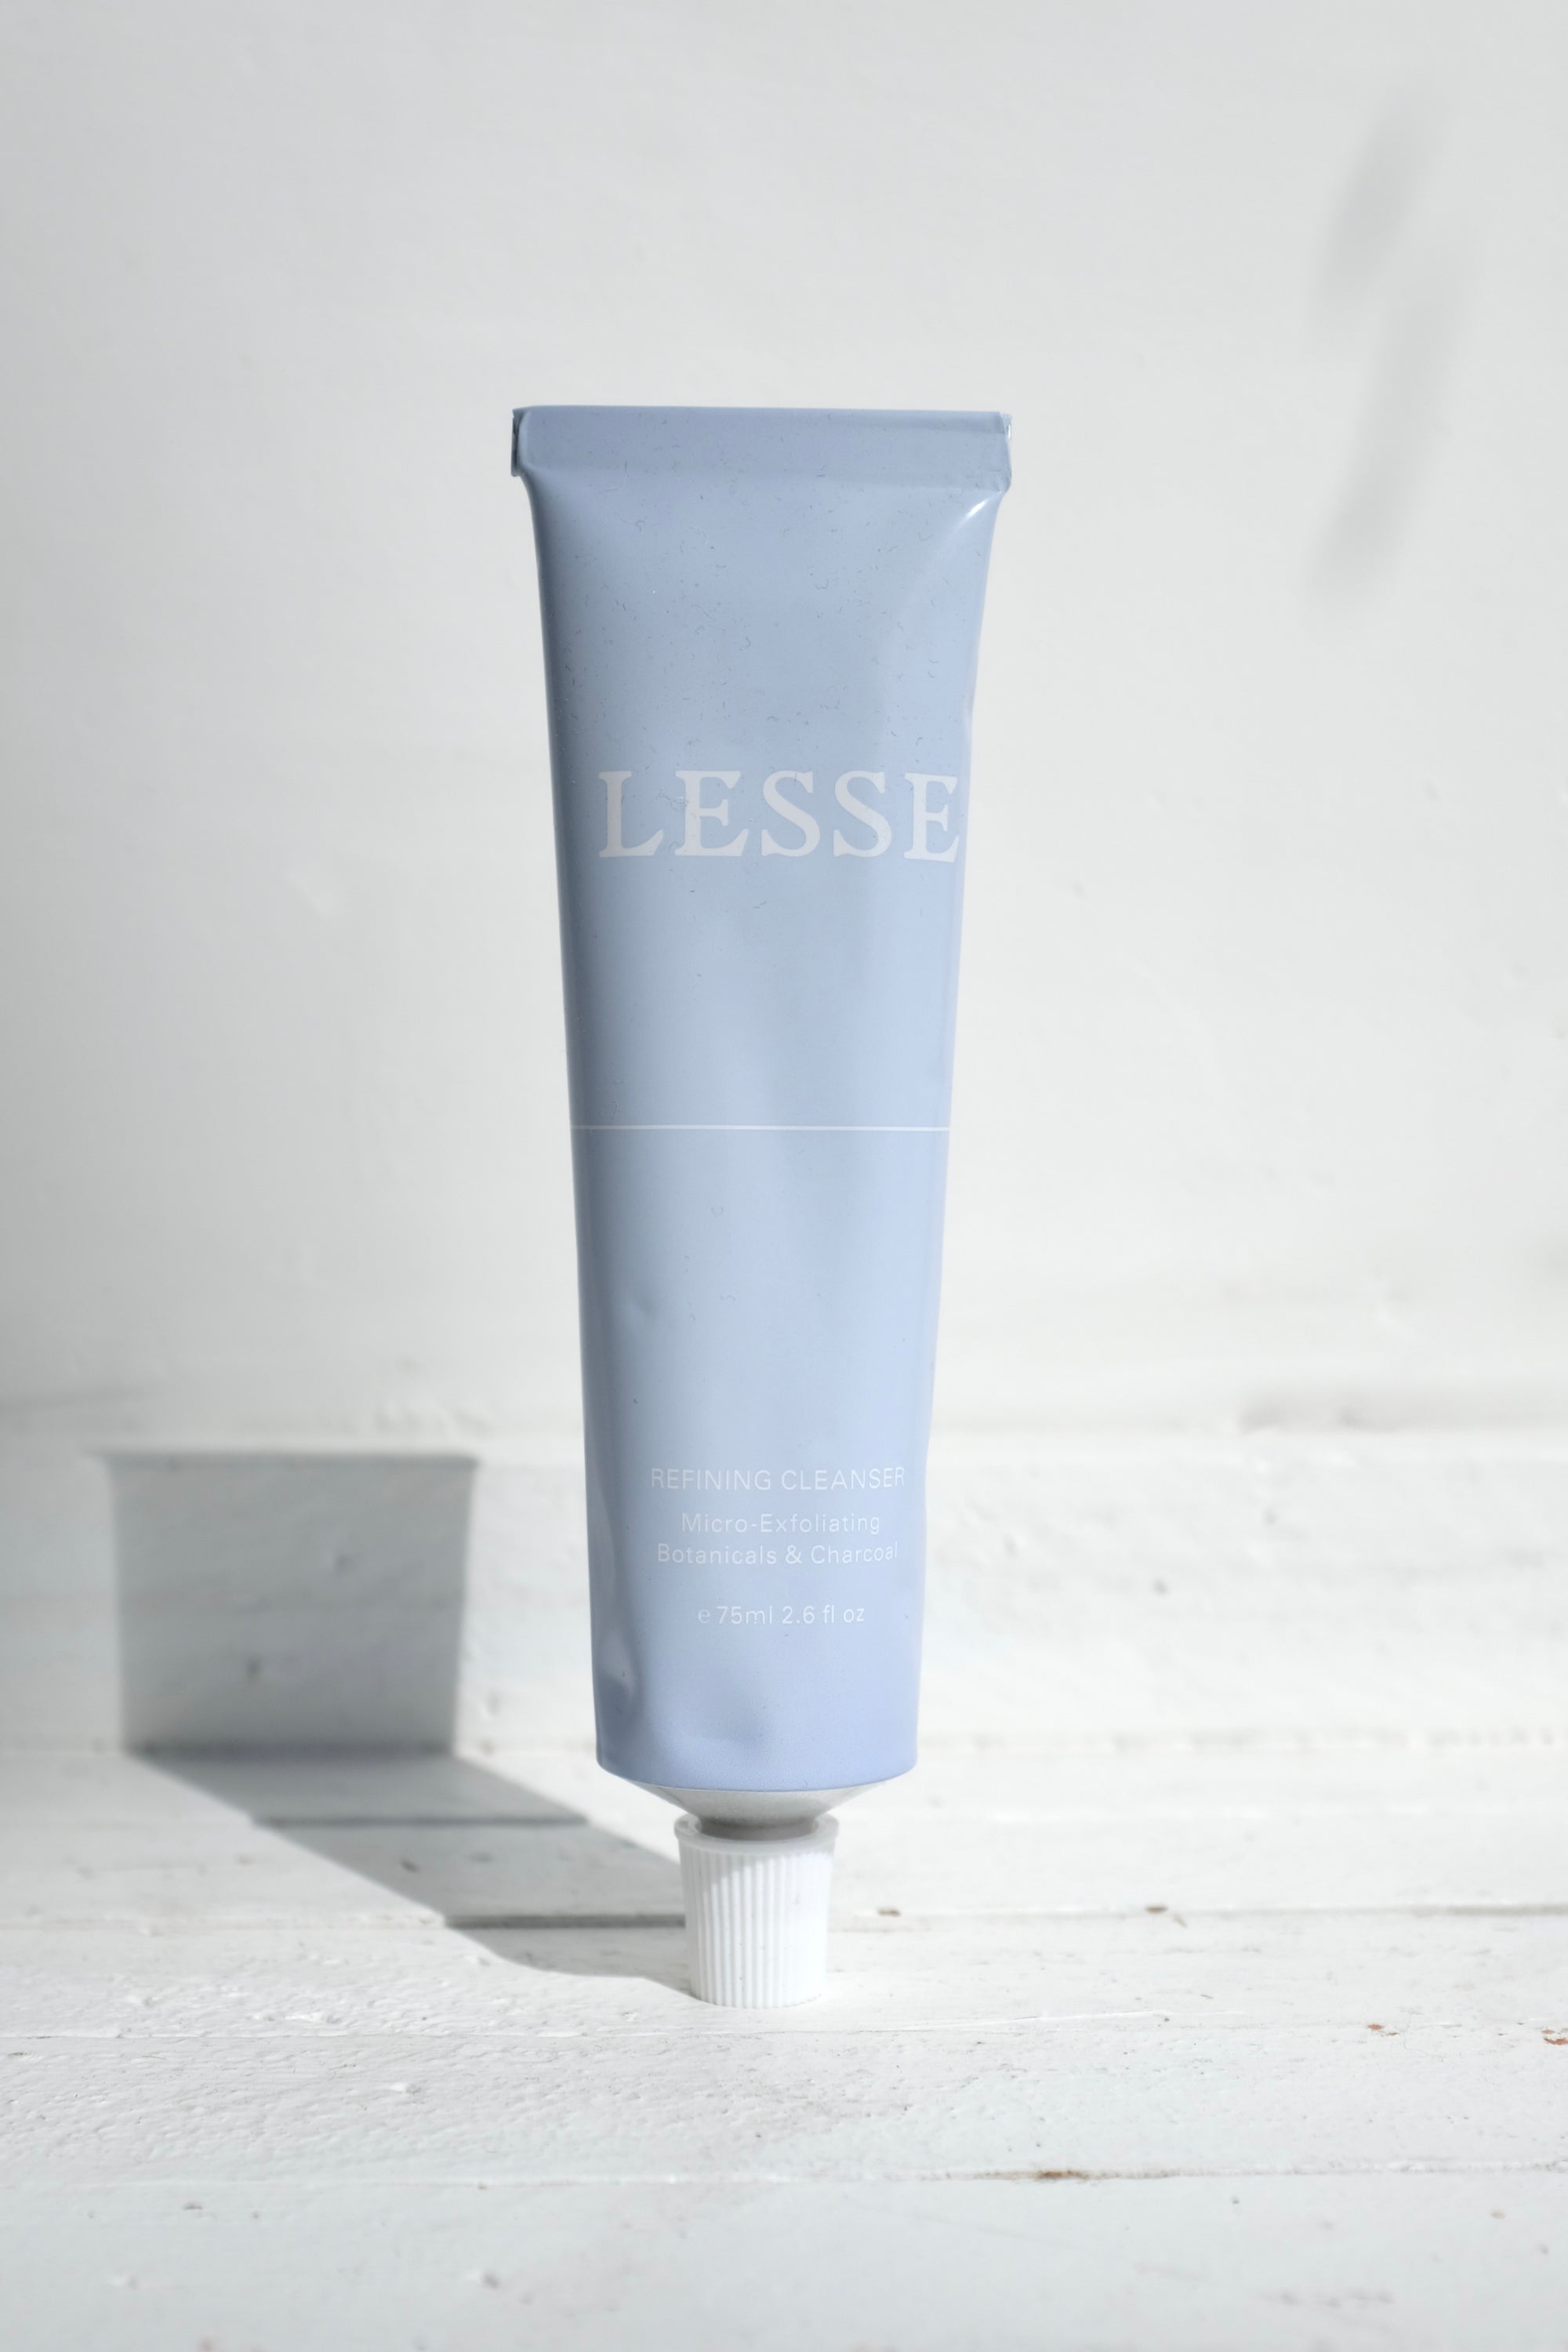 Lesse / Refining Cleanser / Micro-Exfoliating Botanicals &amp; Charcoal 